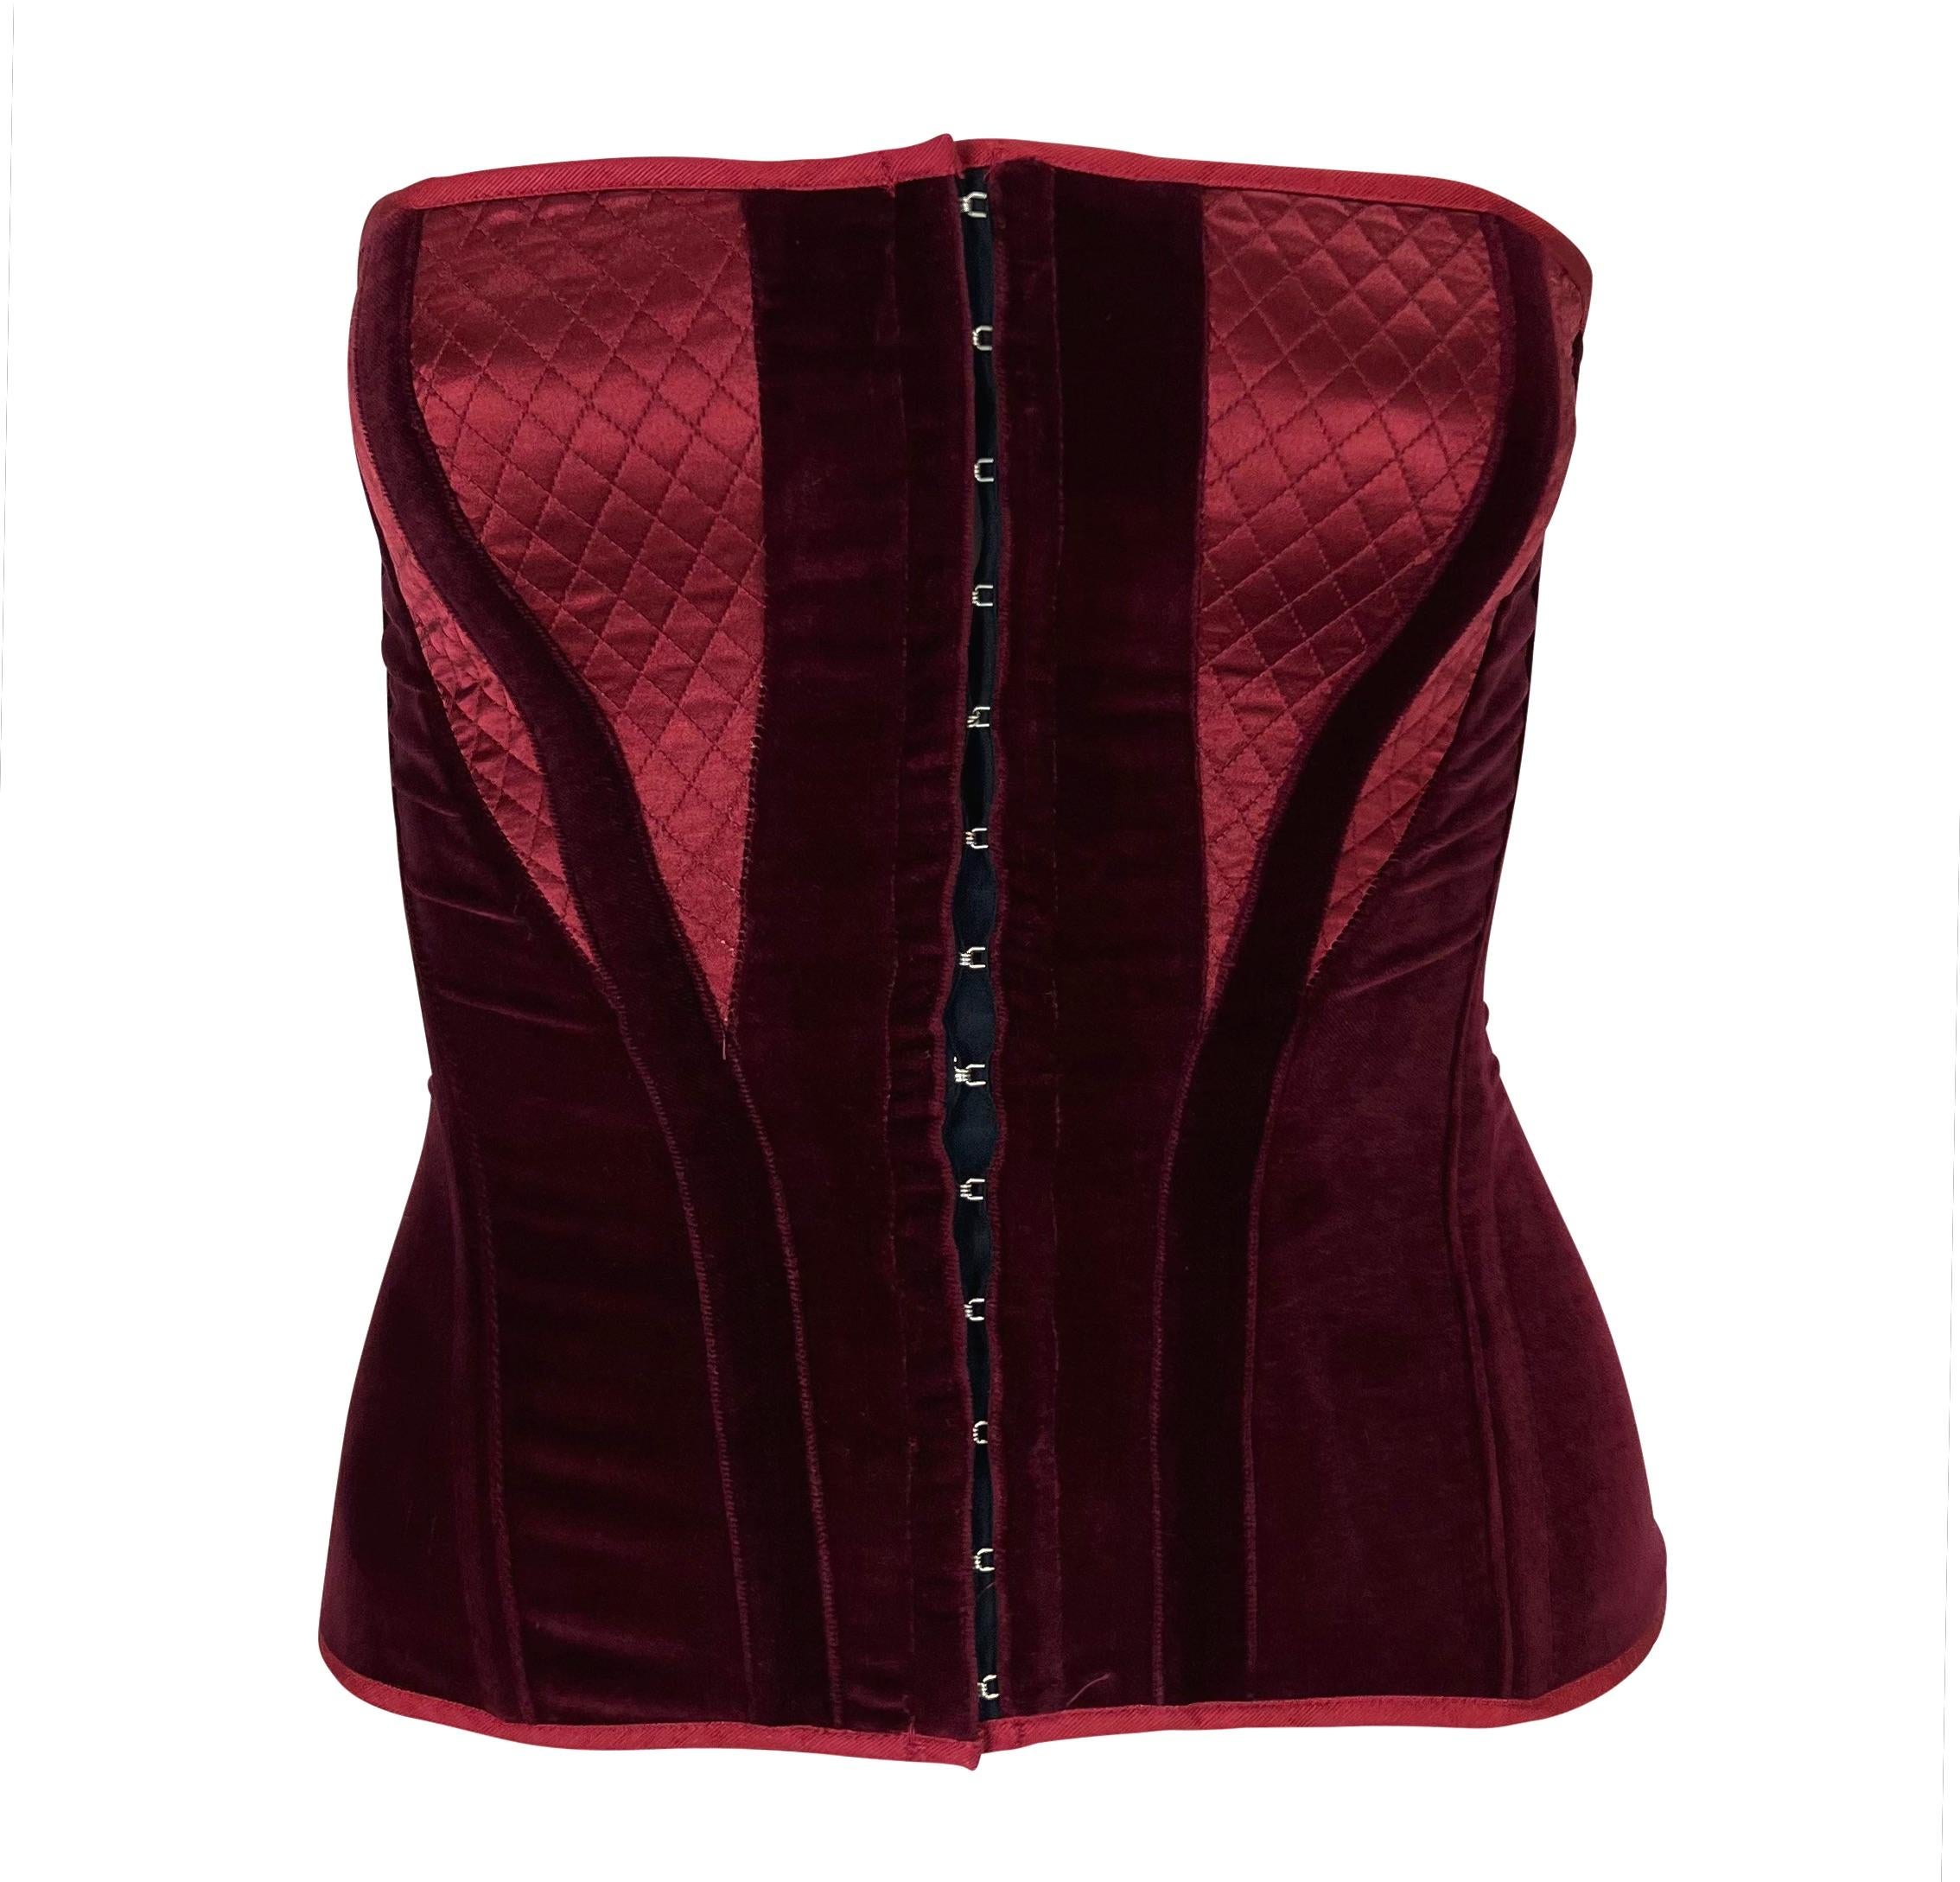 F/W 2004 Roberto Cavalli Burgundy Velvet Quilted Satin Lace-Up Corset Bustier For Sale